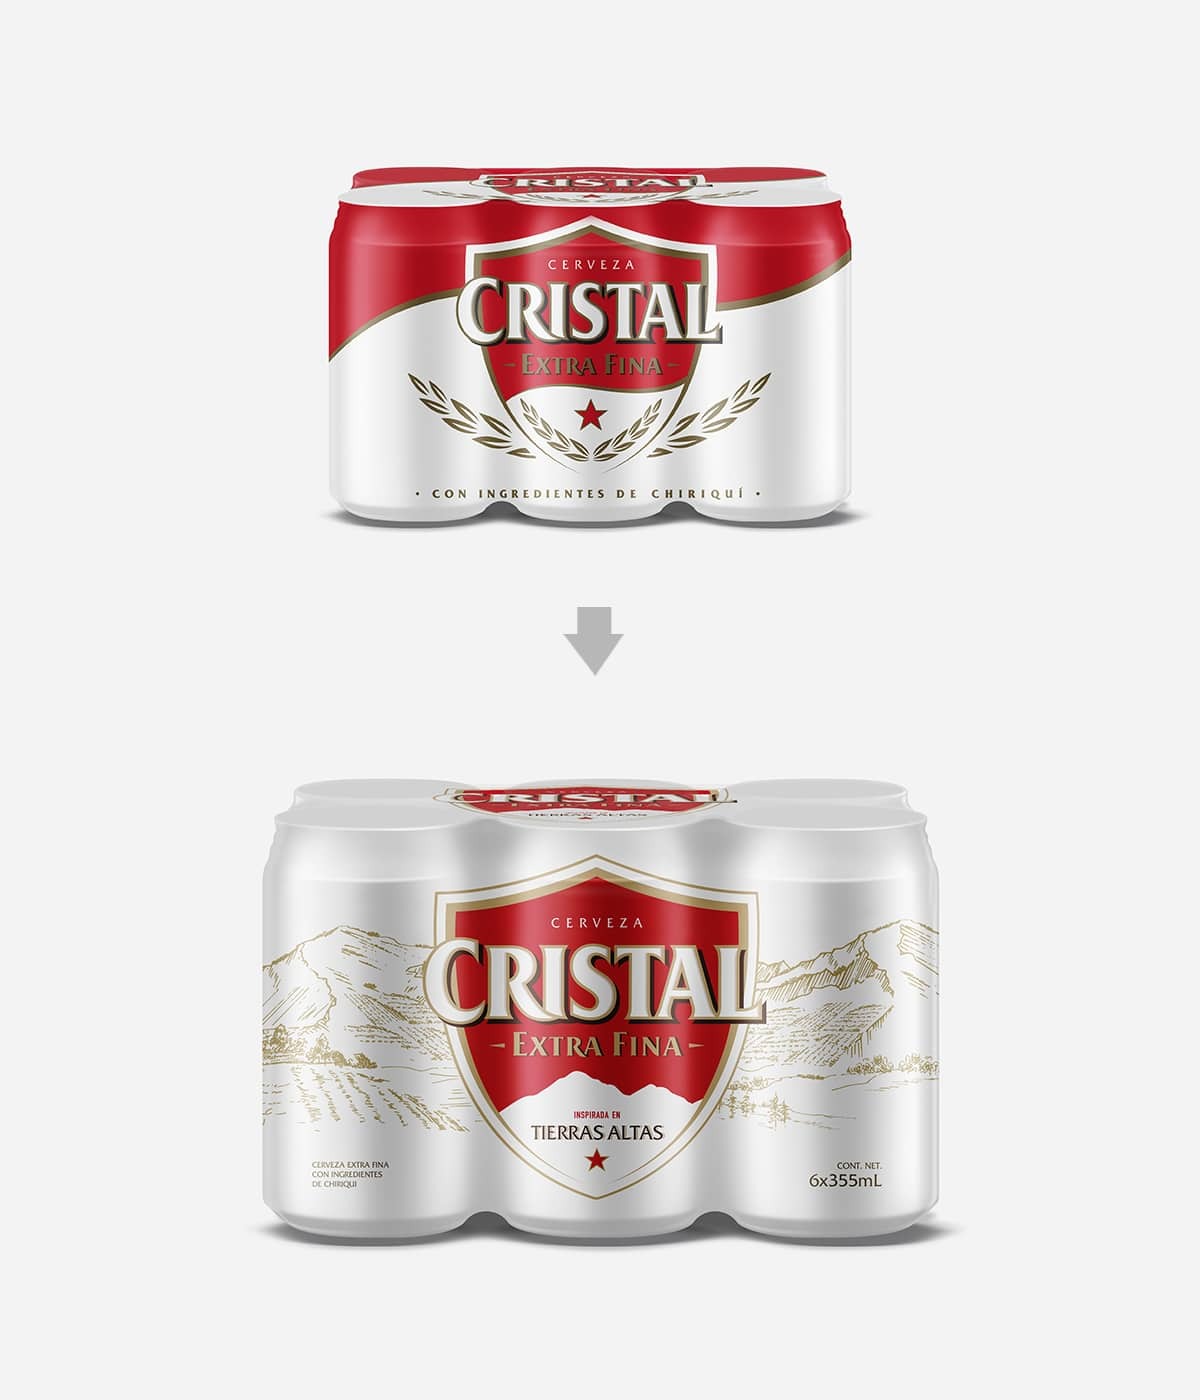 Imaginity, Cristal, Beer, Packaging Design, Multipack, Before and After